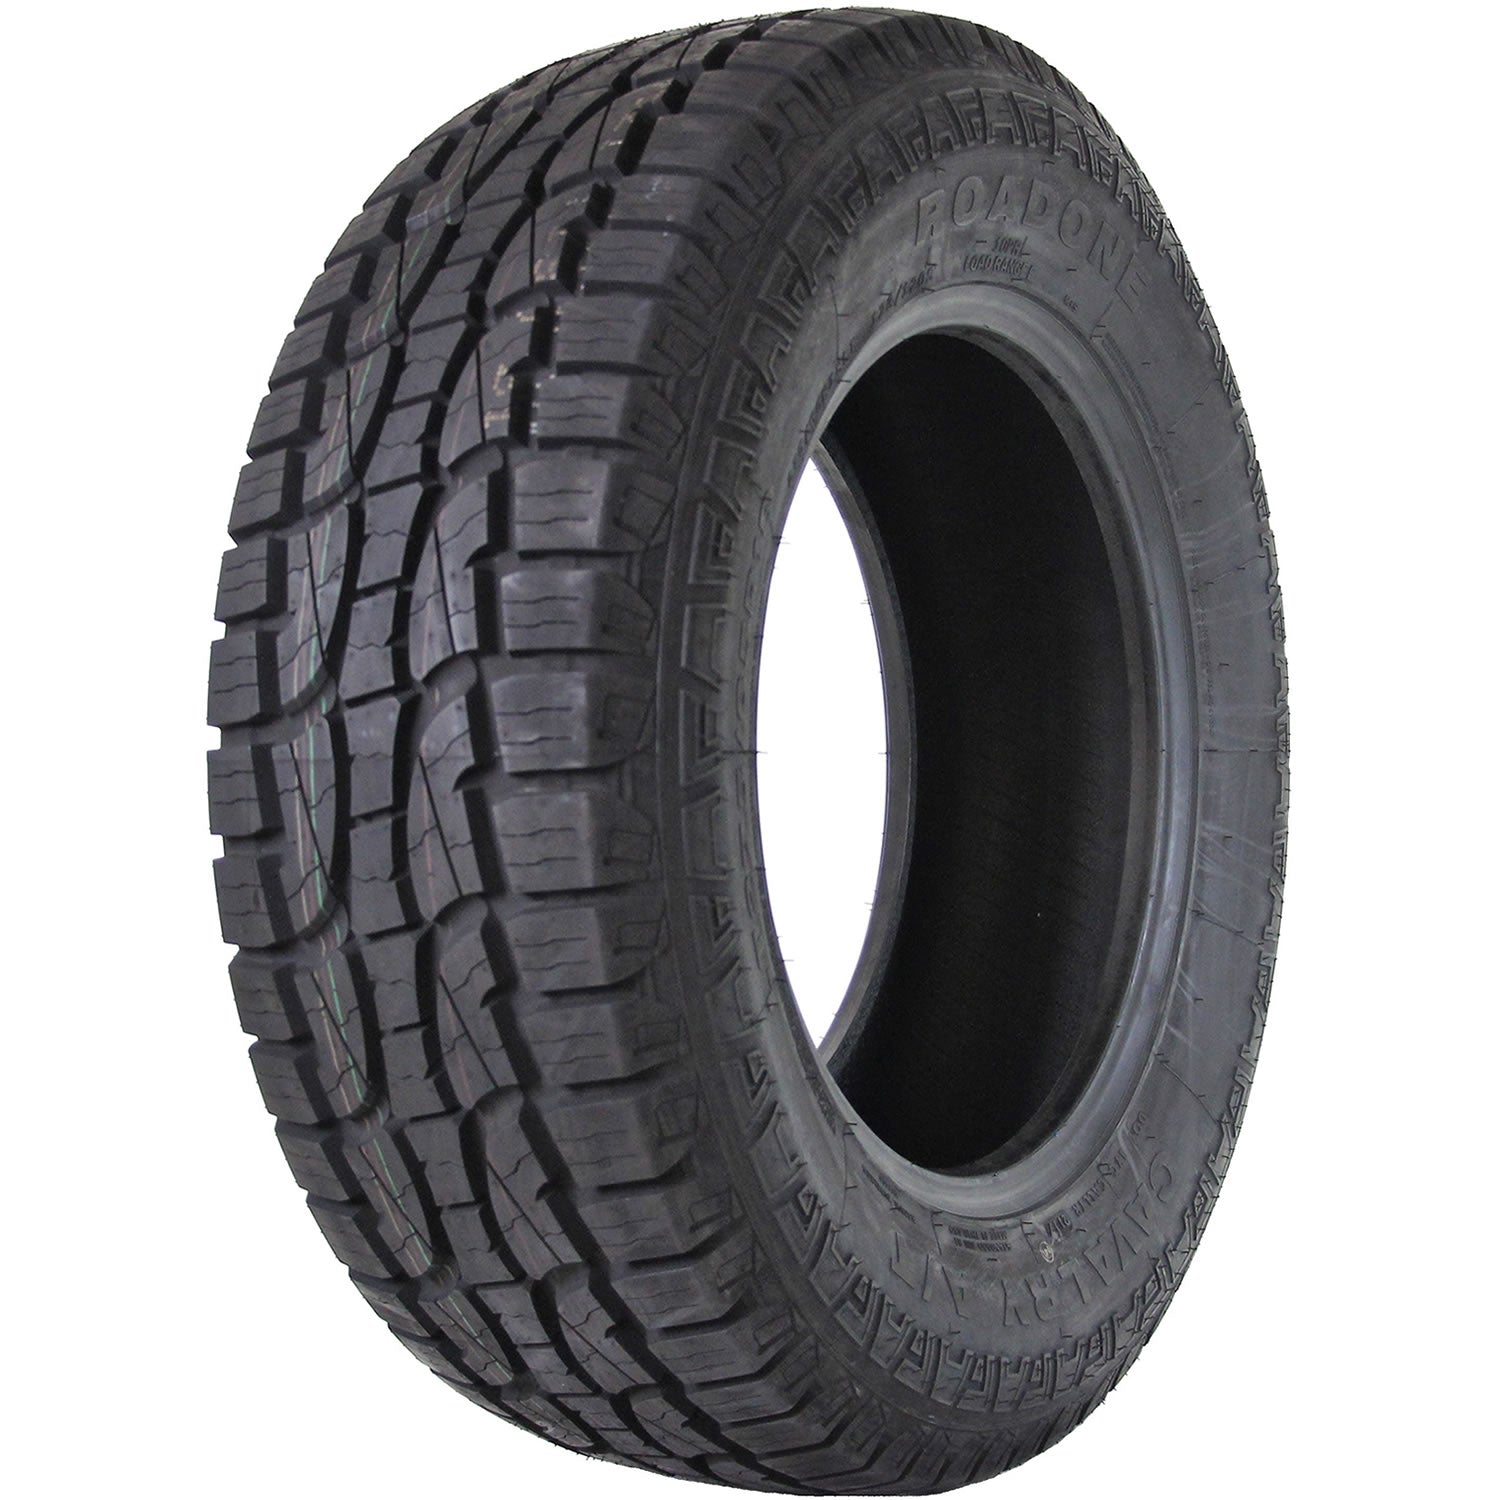 ROAD ONE CAVALRY A/T 265/70R17 (31.7X10.7R 17) Tires